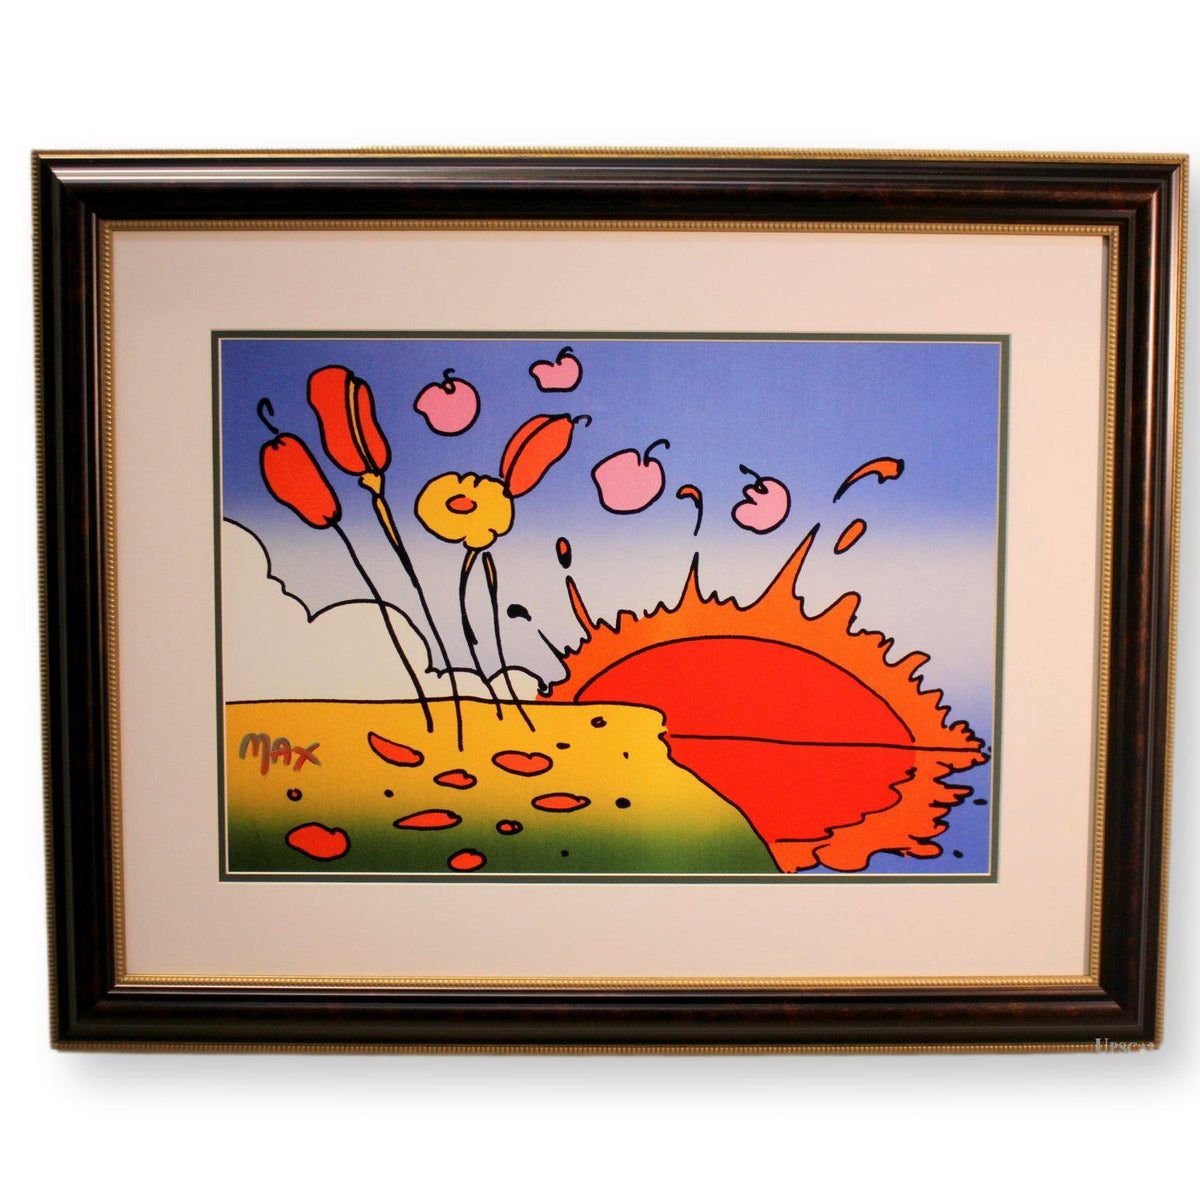 "Sunrise Flowers" by Peter Max